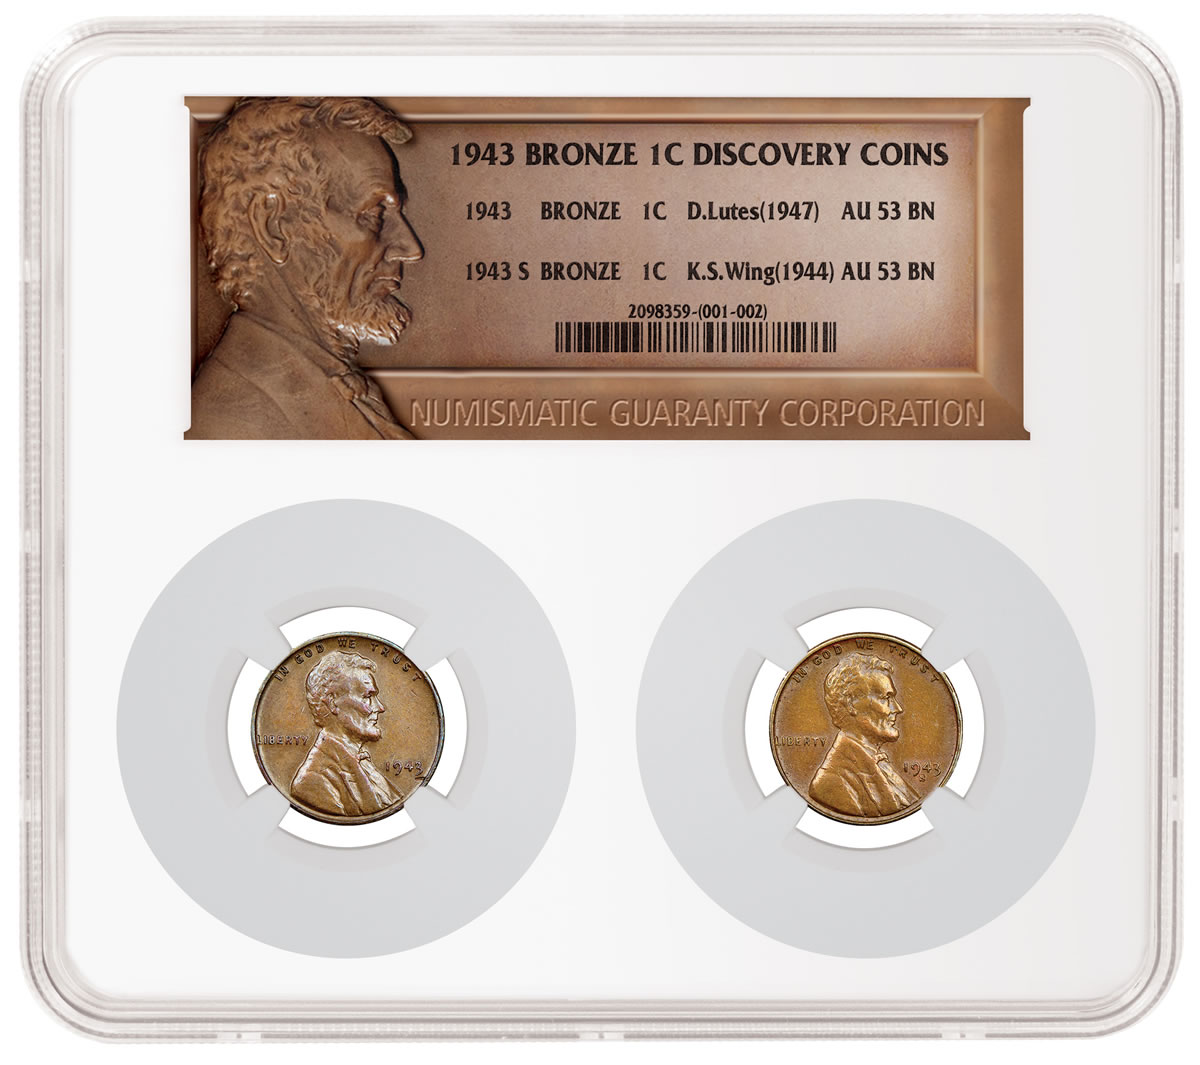 Wing And Lutes 1943 Bronze Lincoln Cents Brought Together Under One Owner Coin News,Kielbasa Sausage Pasta Recipe